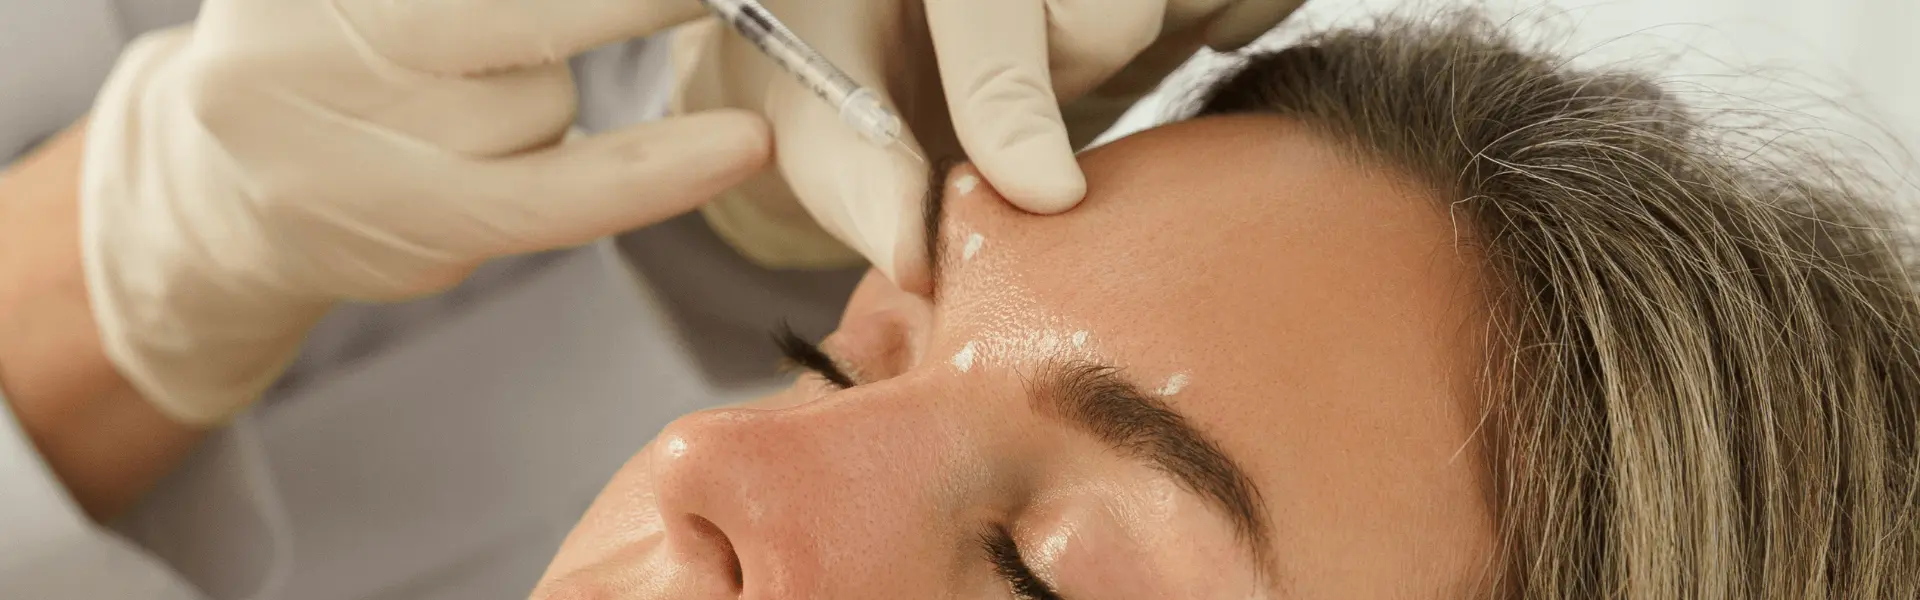 A woman getting her eyebrows injected by a doctor.